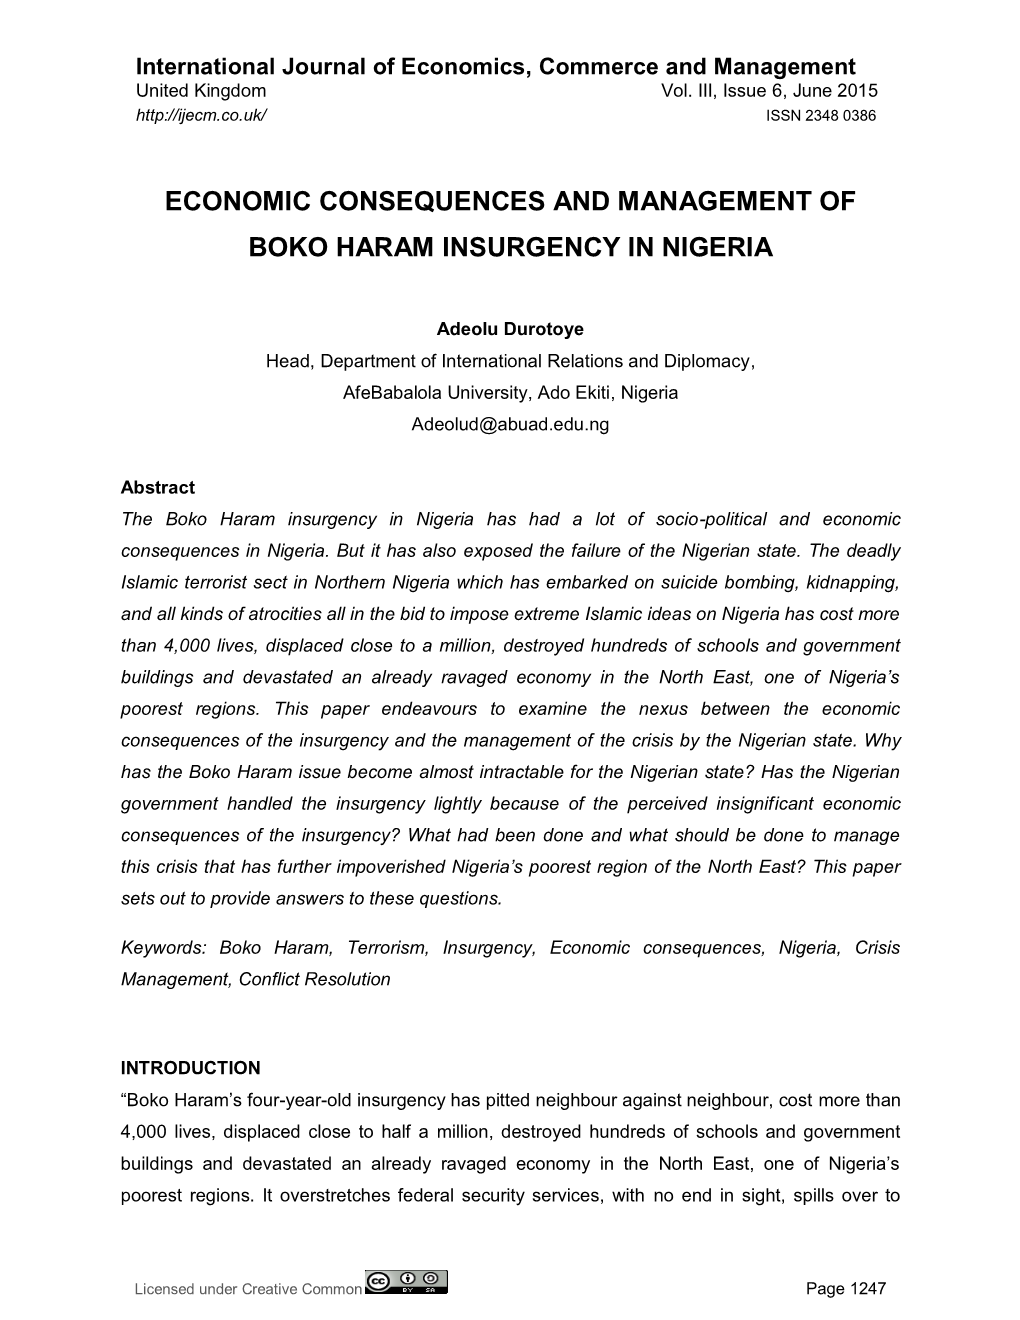 Economic Consequences and Management of Boko Haram Insurgency in Nigeria